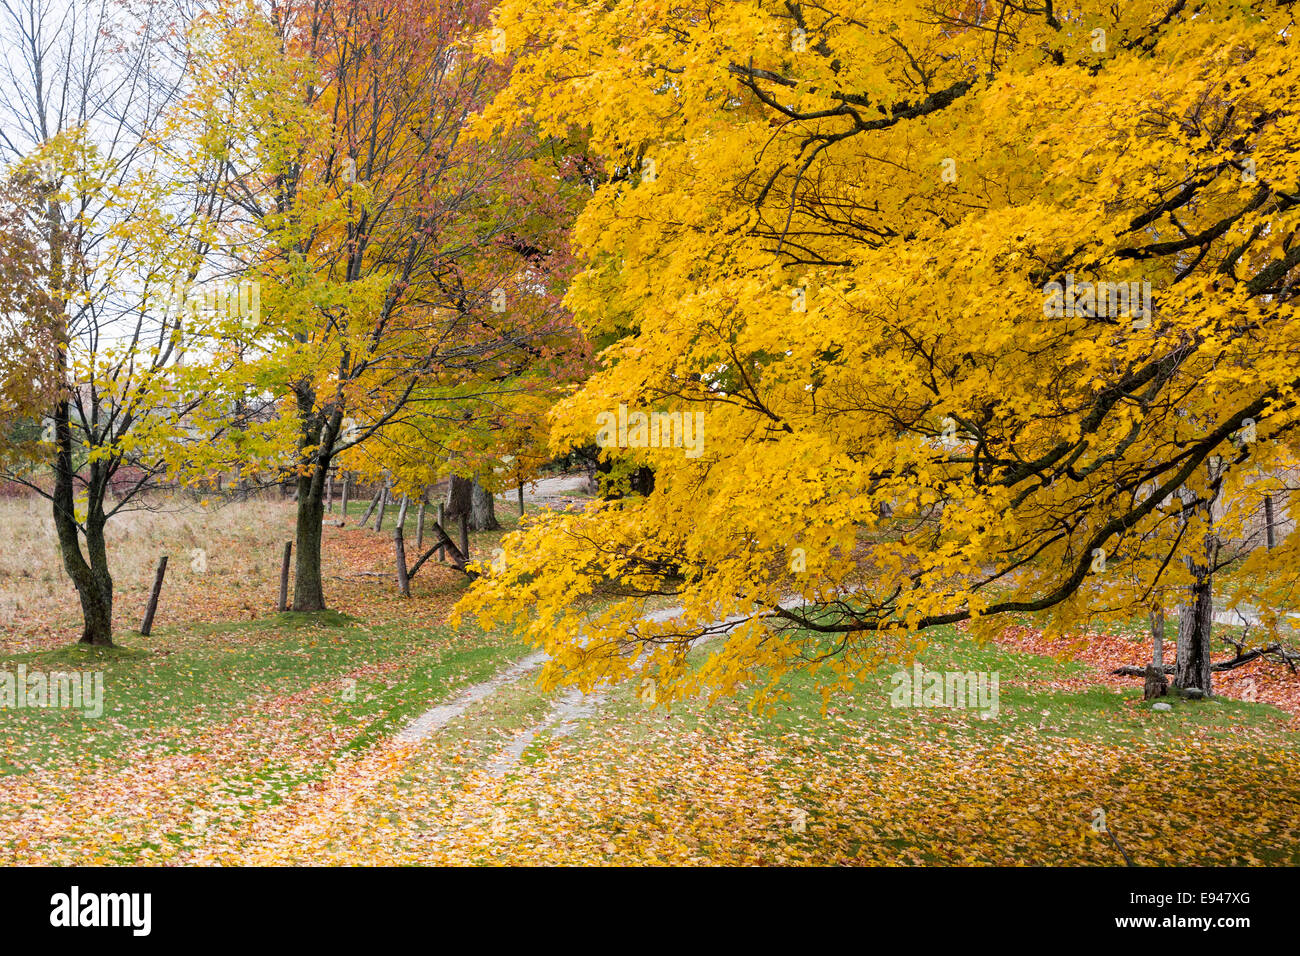 Farm-driveway-with-colourful-Maple-trees